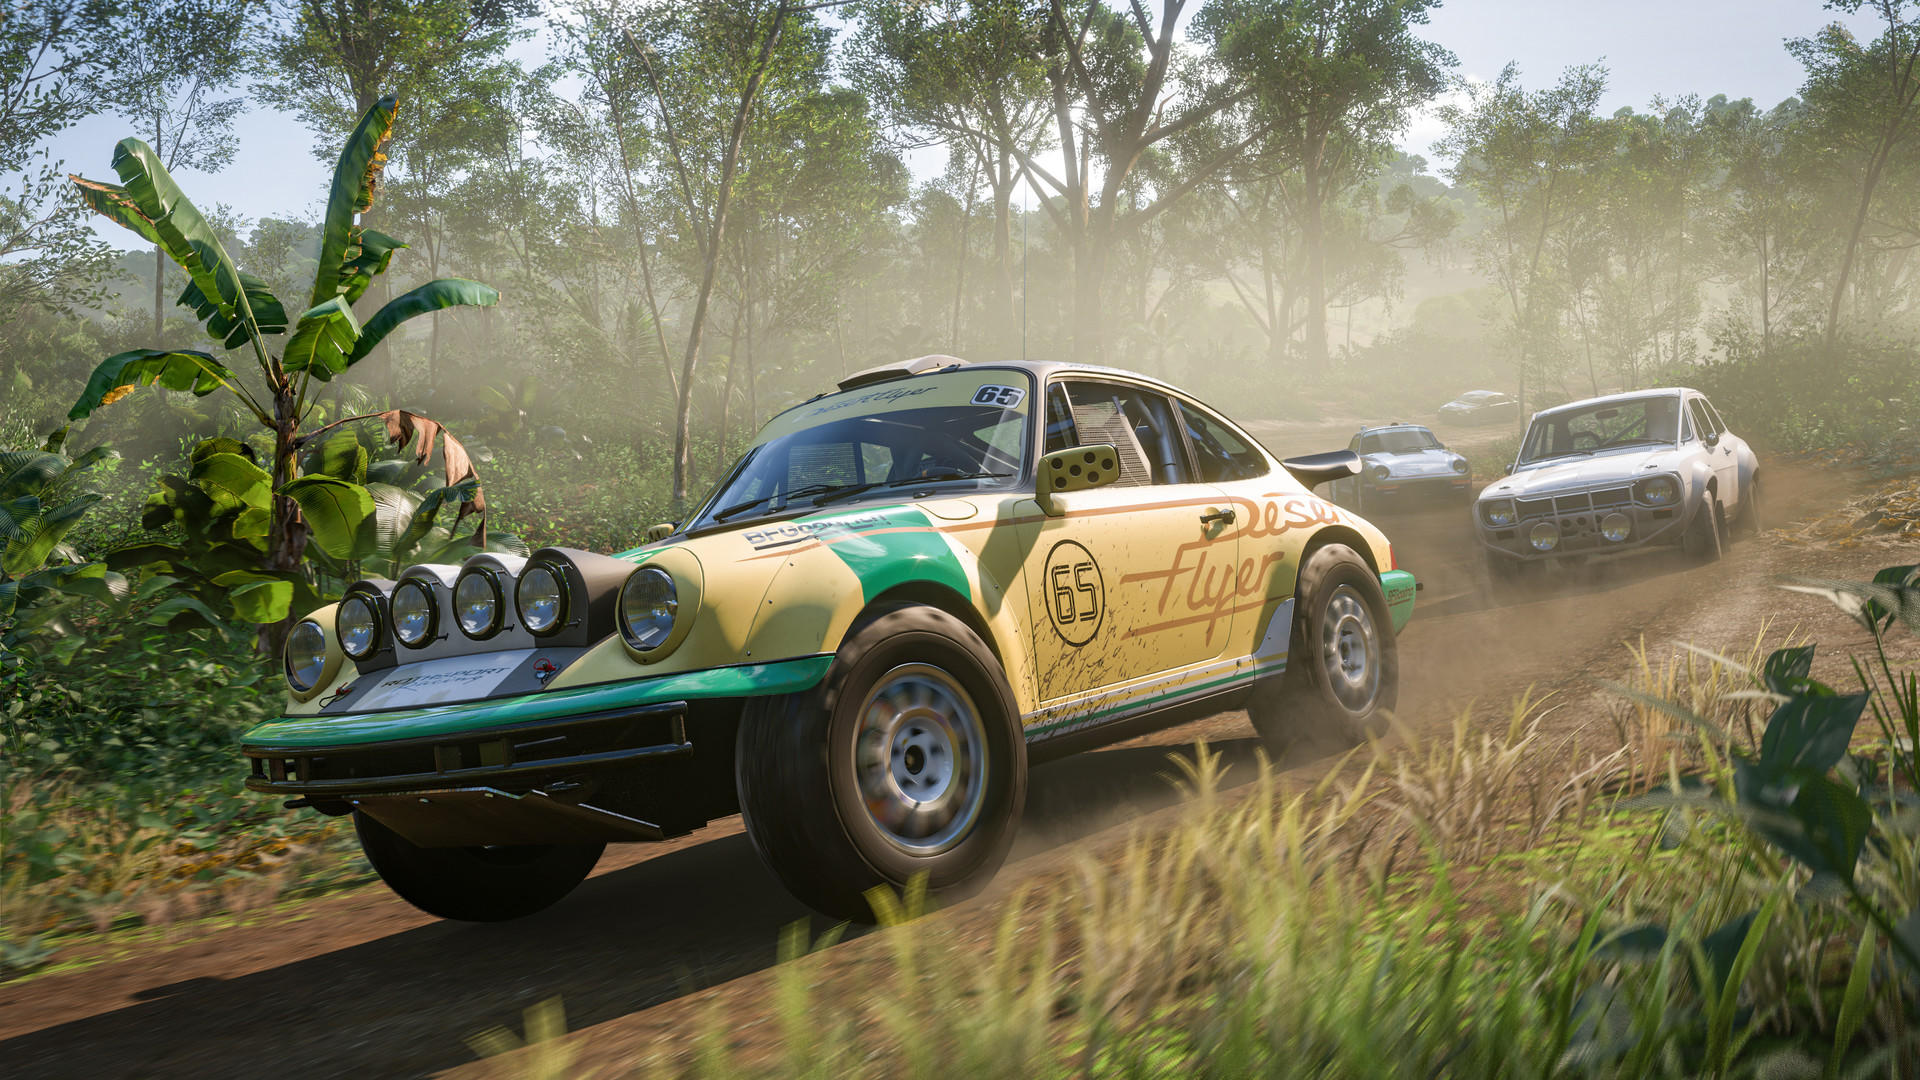 FORZA HORIZON MOBILE RELEASED FOR ANDROID - Rally Horizon - TapTap